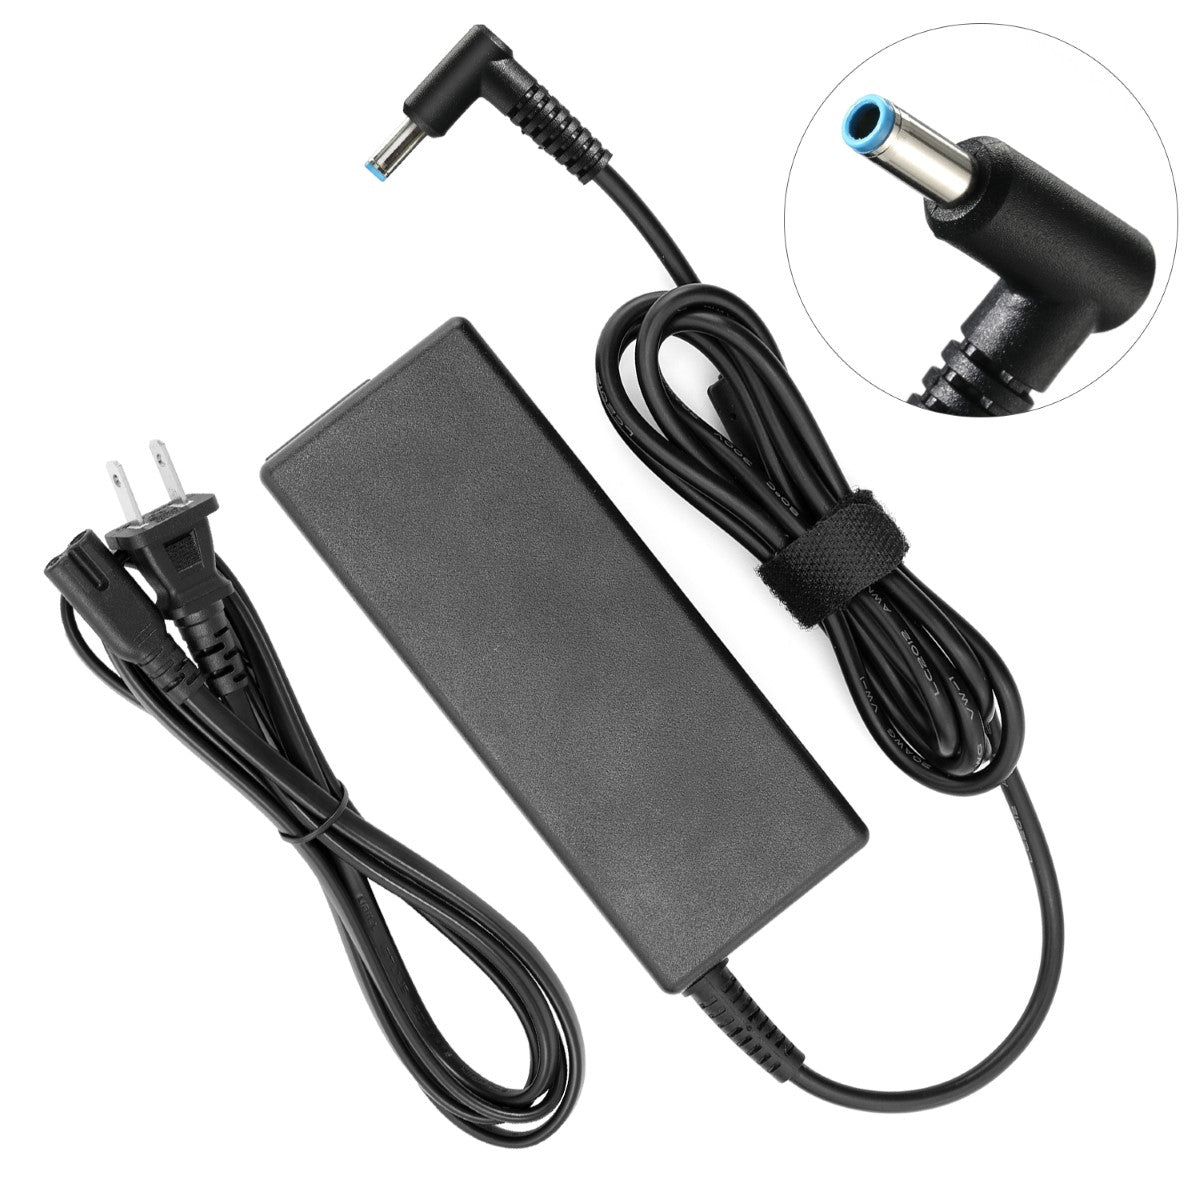 AC Adapter Charger for HP Envy Touchsmart 17-j021nr Notebook.